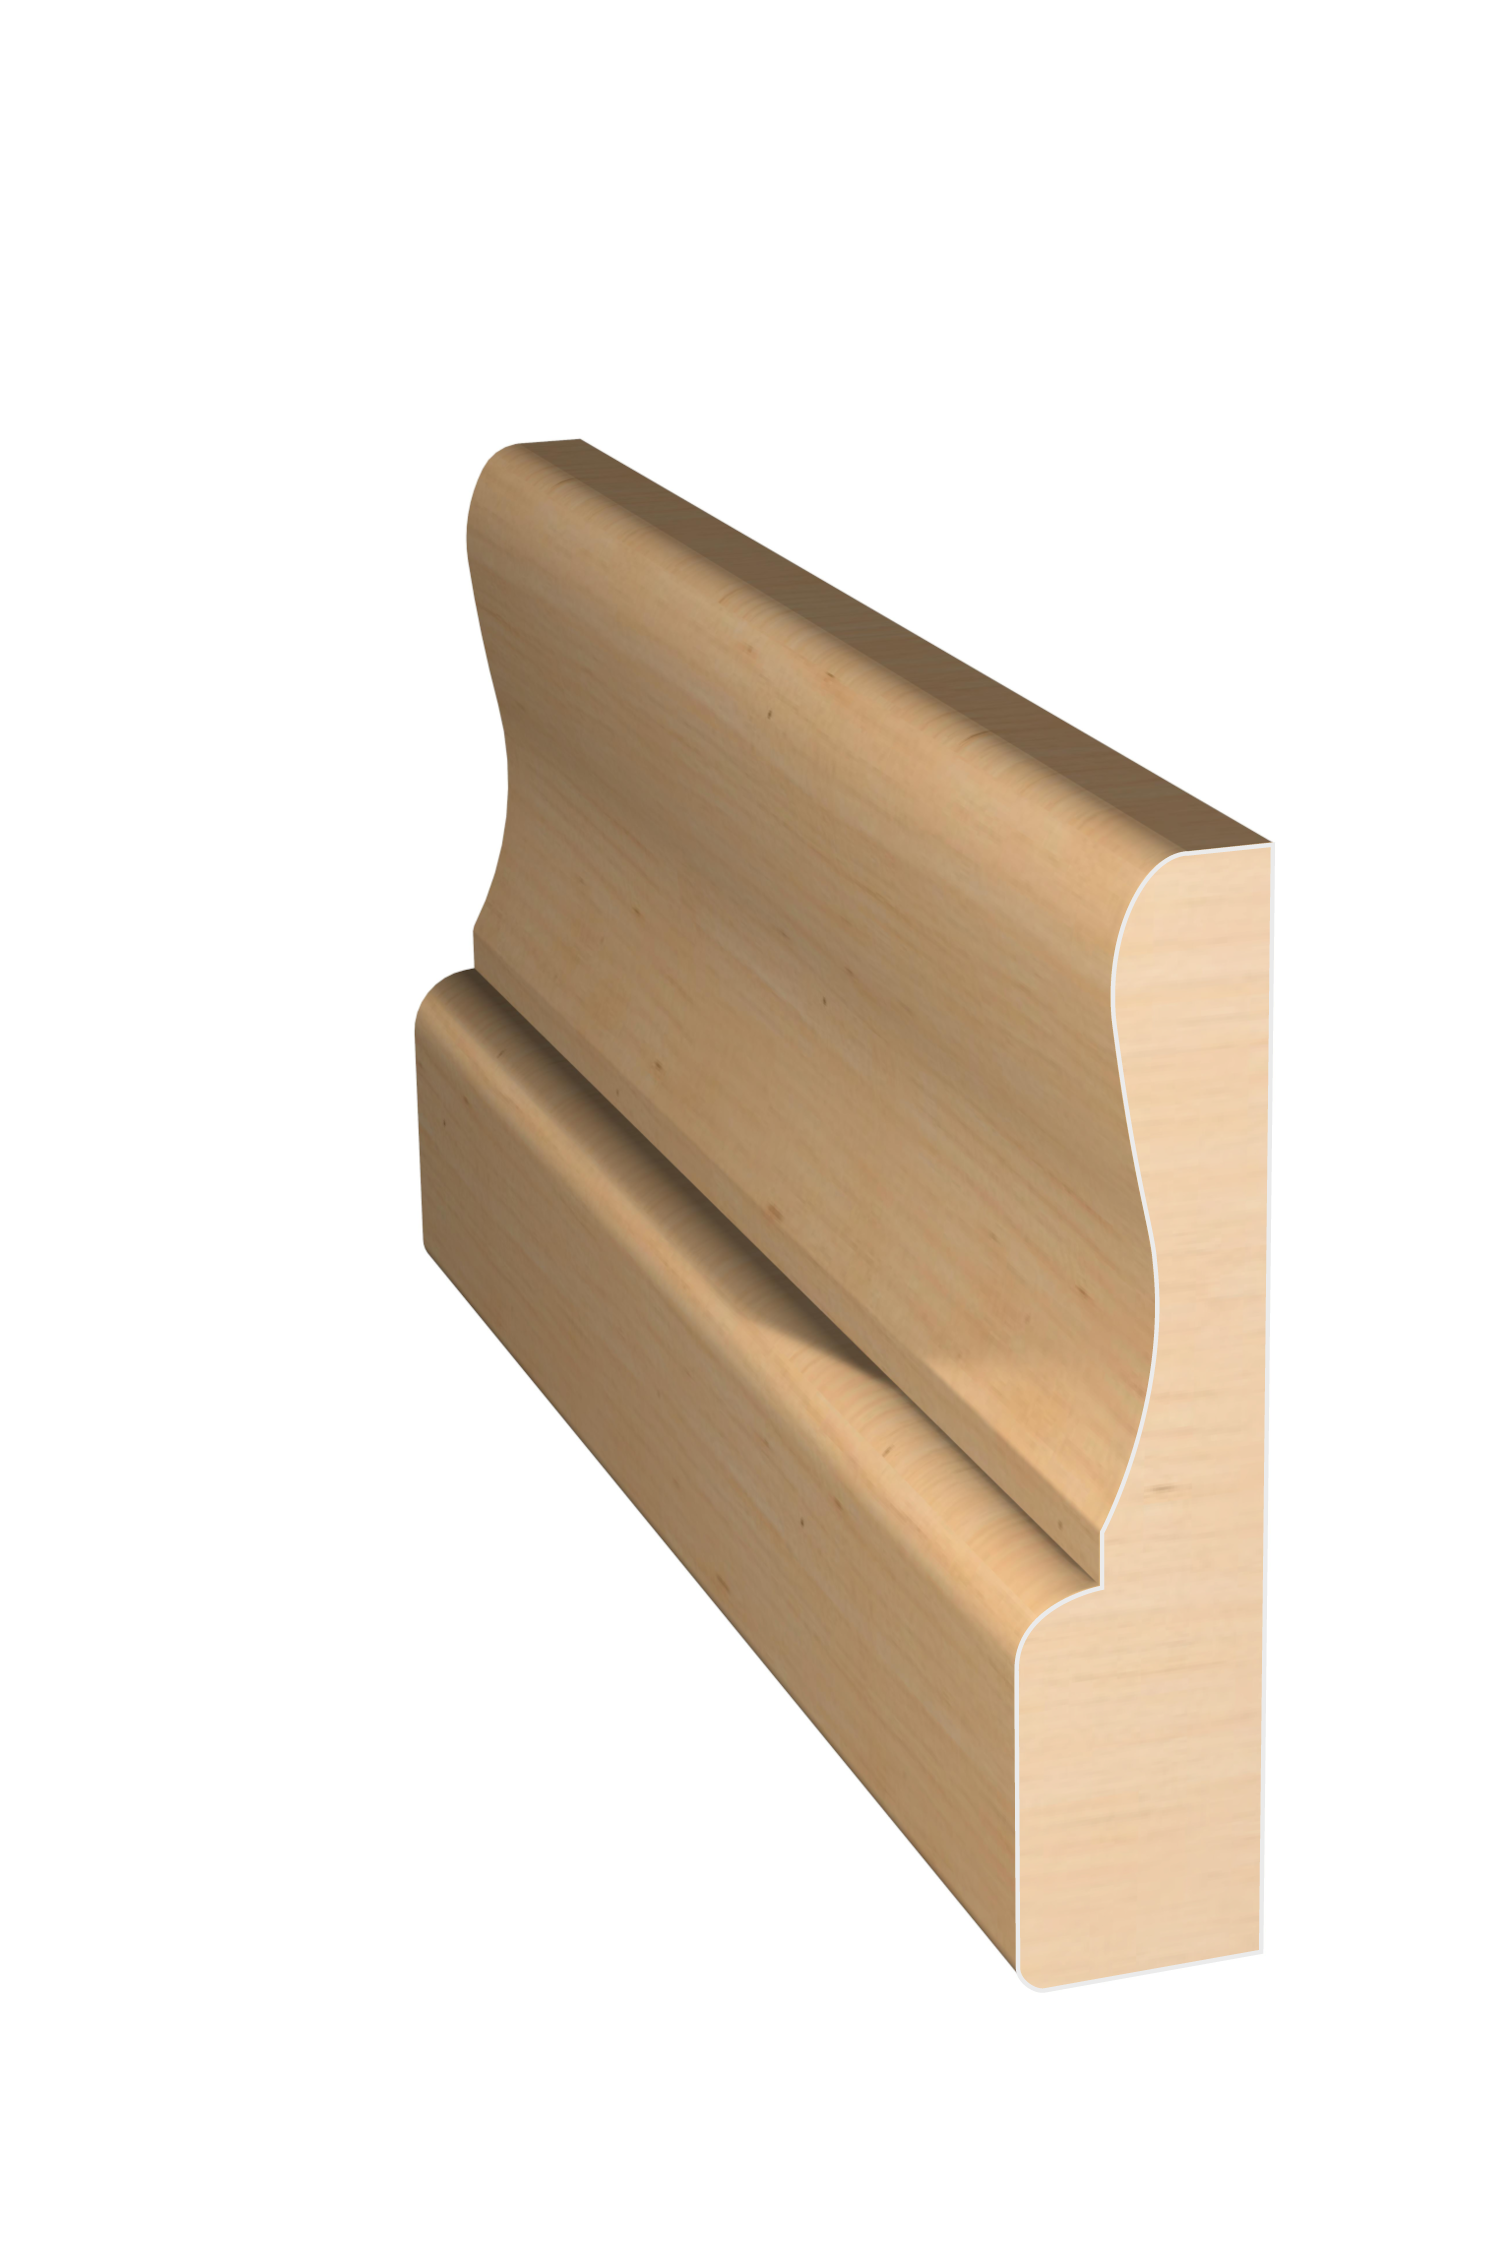 Three dimensional rendering of custom casing wood molding CAPL31 made by Public Lumber Company in Detroit.